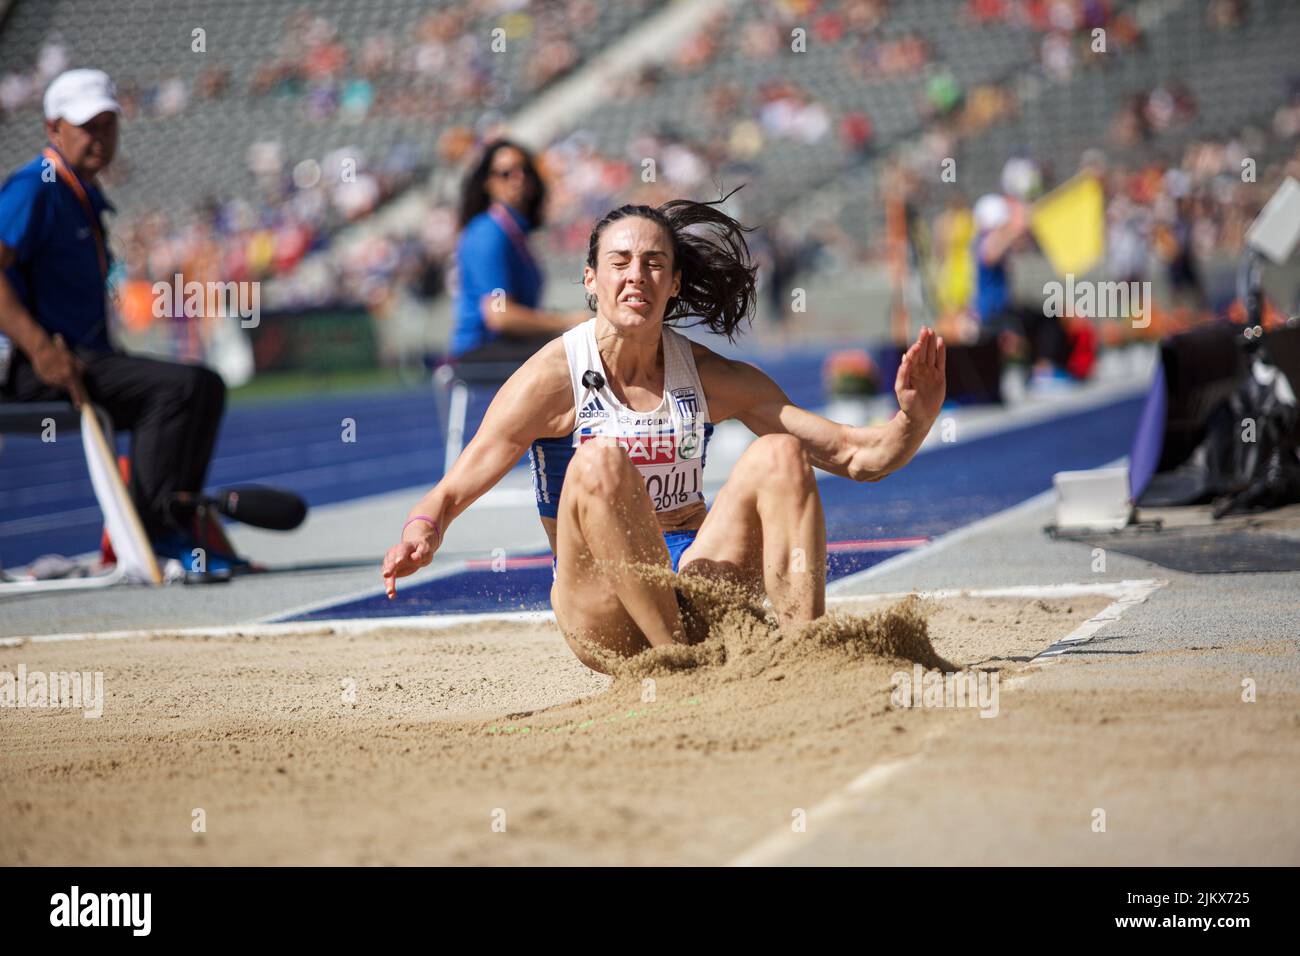 Haido Alexouli Participating In The Long Jump At The European Athletics Championships In Berlin